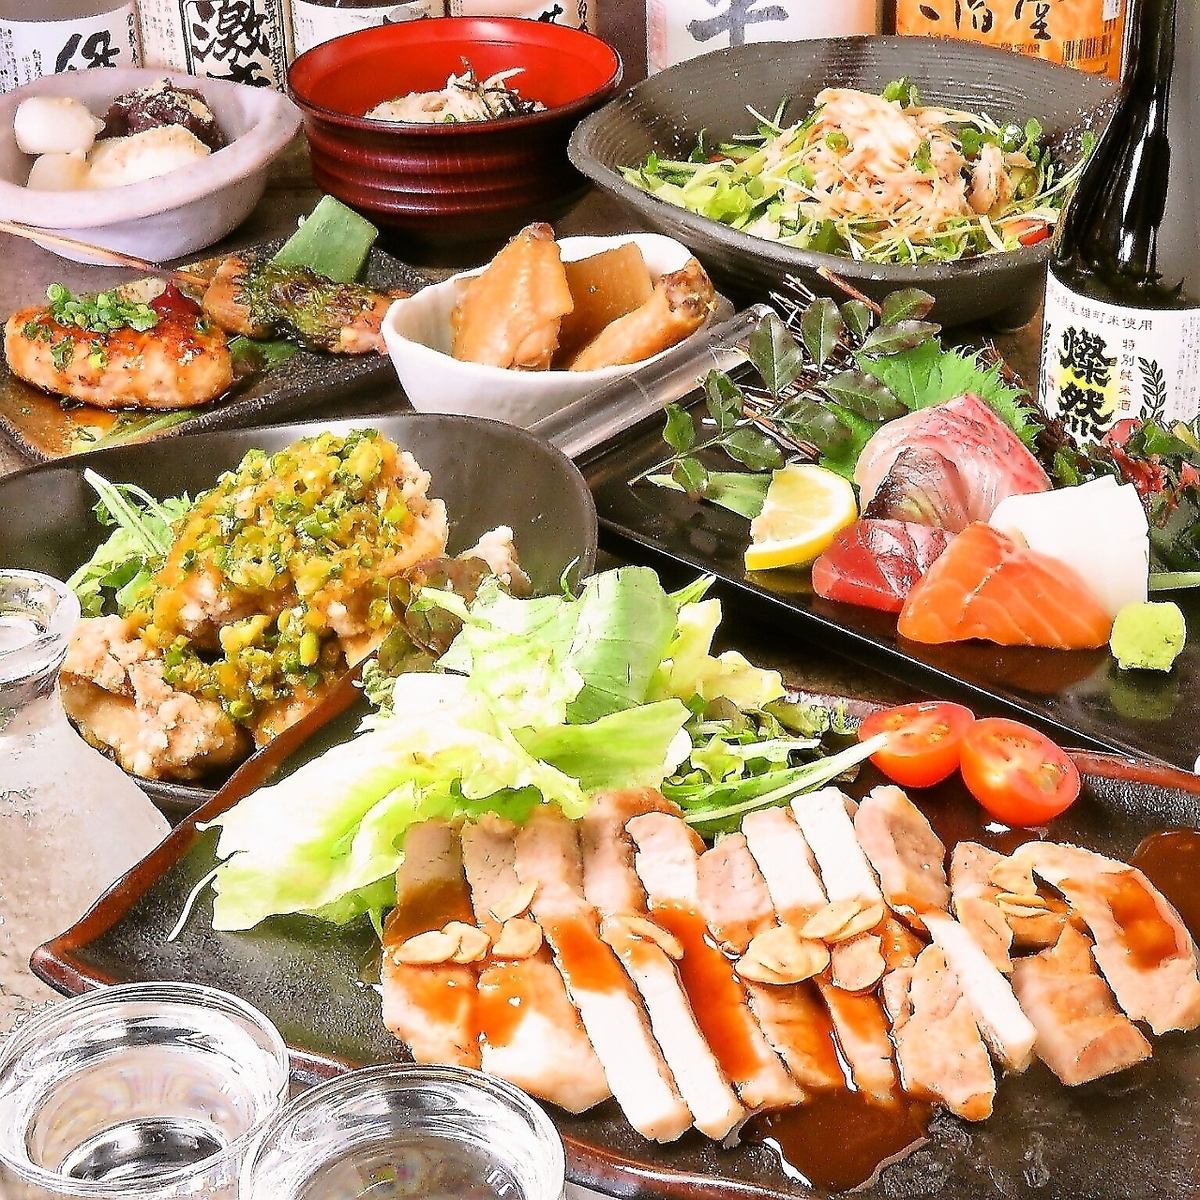 We're prepared to go into the red! 8 recommended dishes, 120 minutes, all-you-can-drink for 3,300 yen